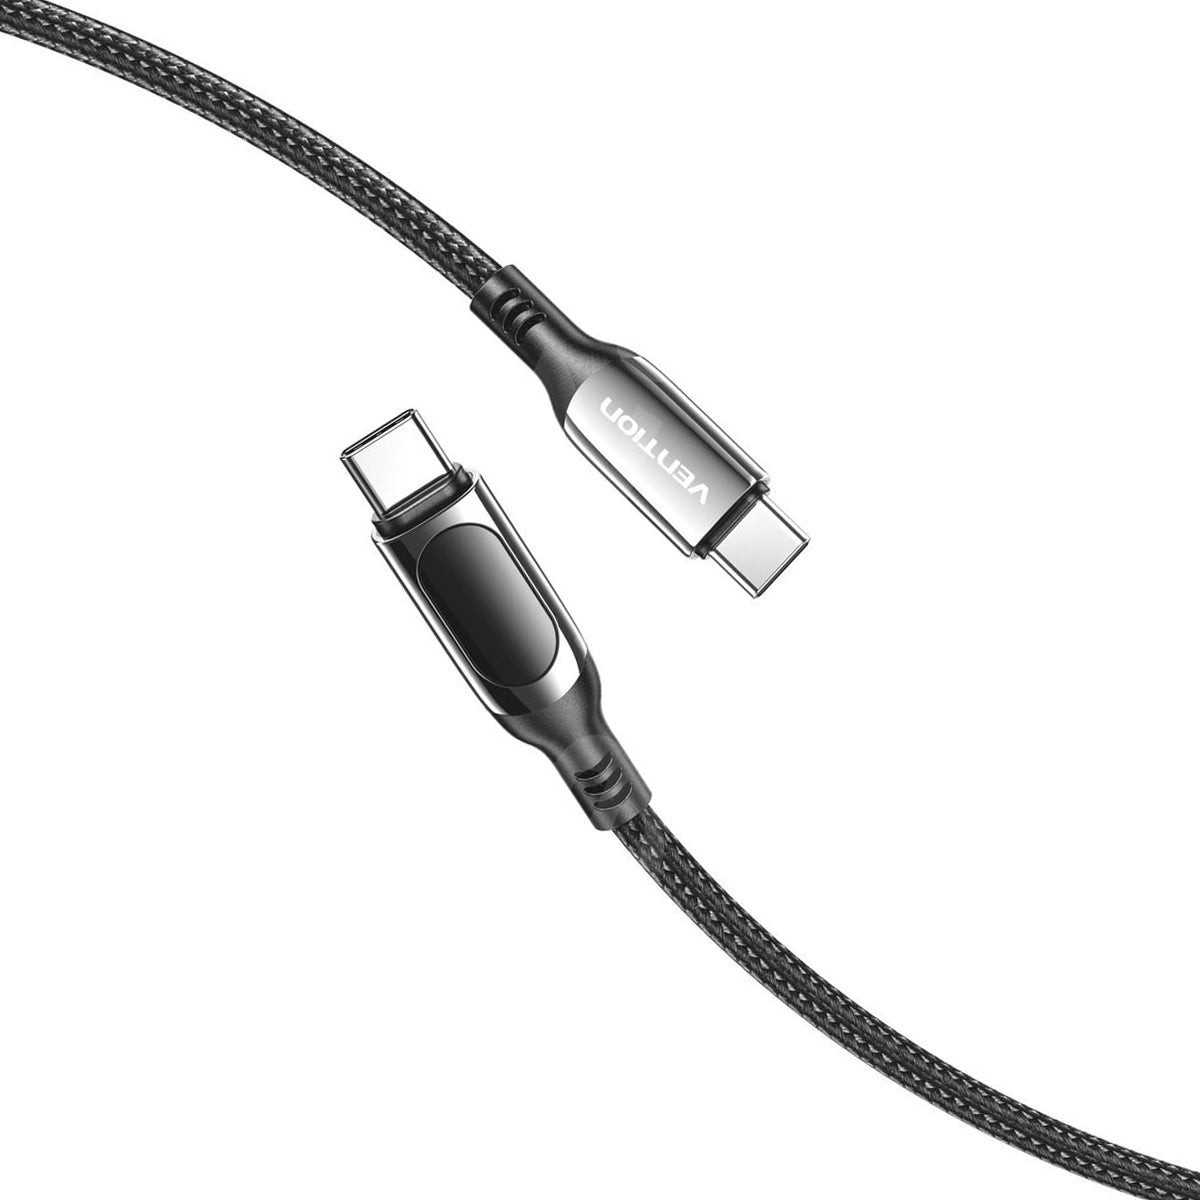 Vention USB-C 2.0 Male to Male Charging and Data Cable 5A 100W with Built In Charge Speed LED Display and Up to 480Mbps Data Transmission for Mobile Devices and Consoles (1.2m, 2m) TAYBAV TAYBH